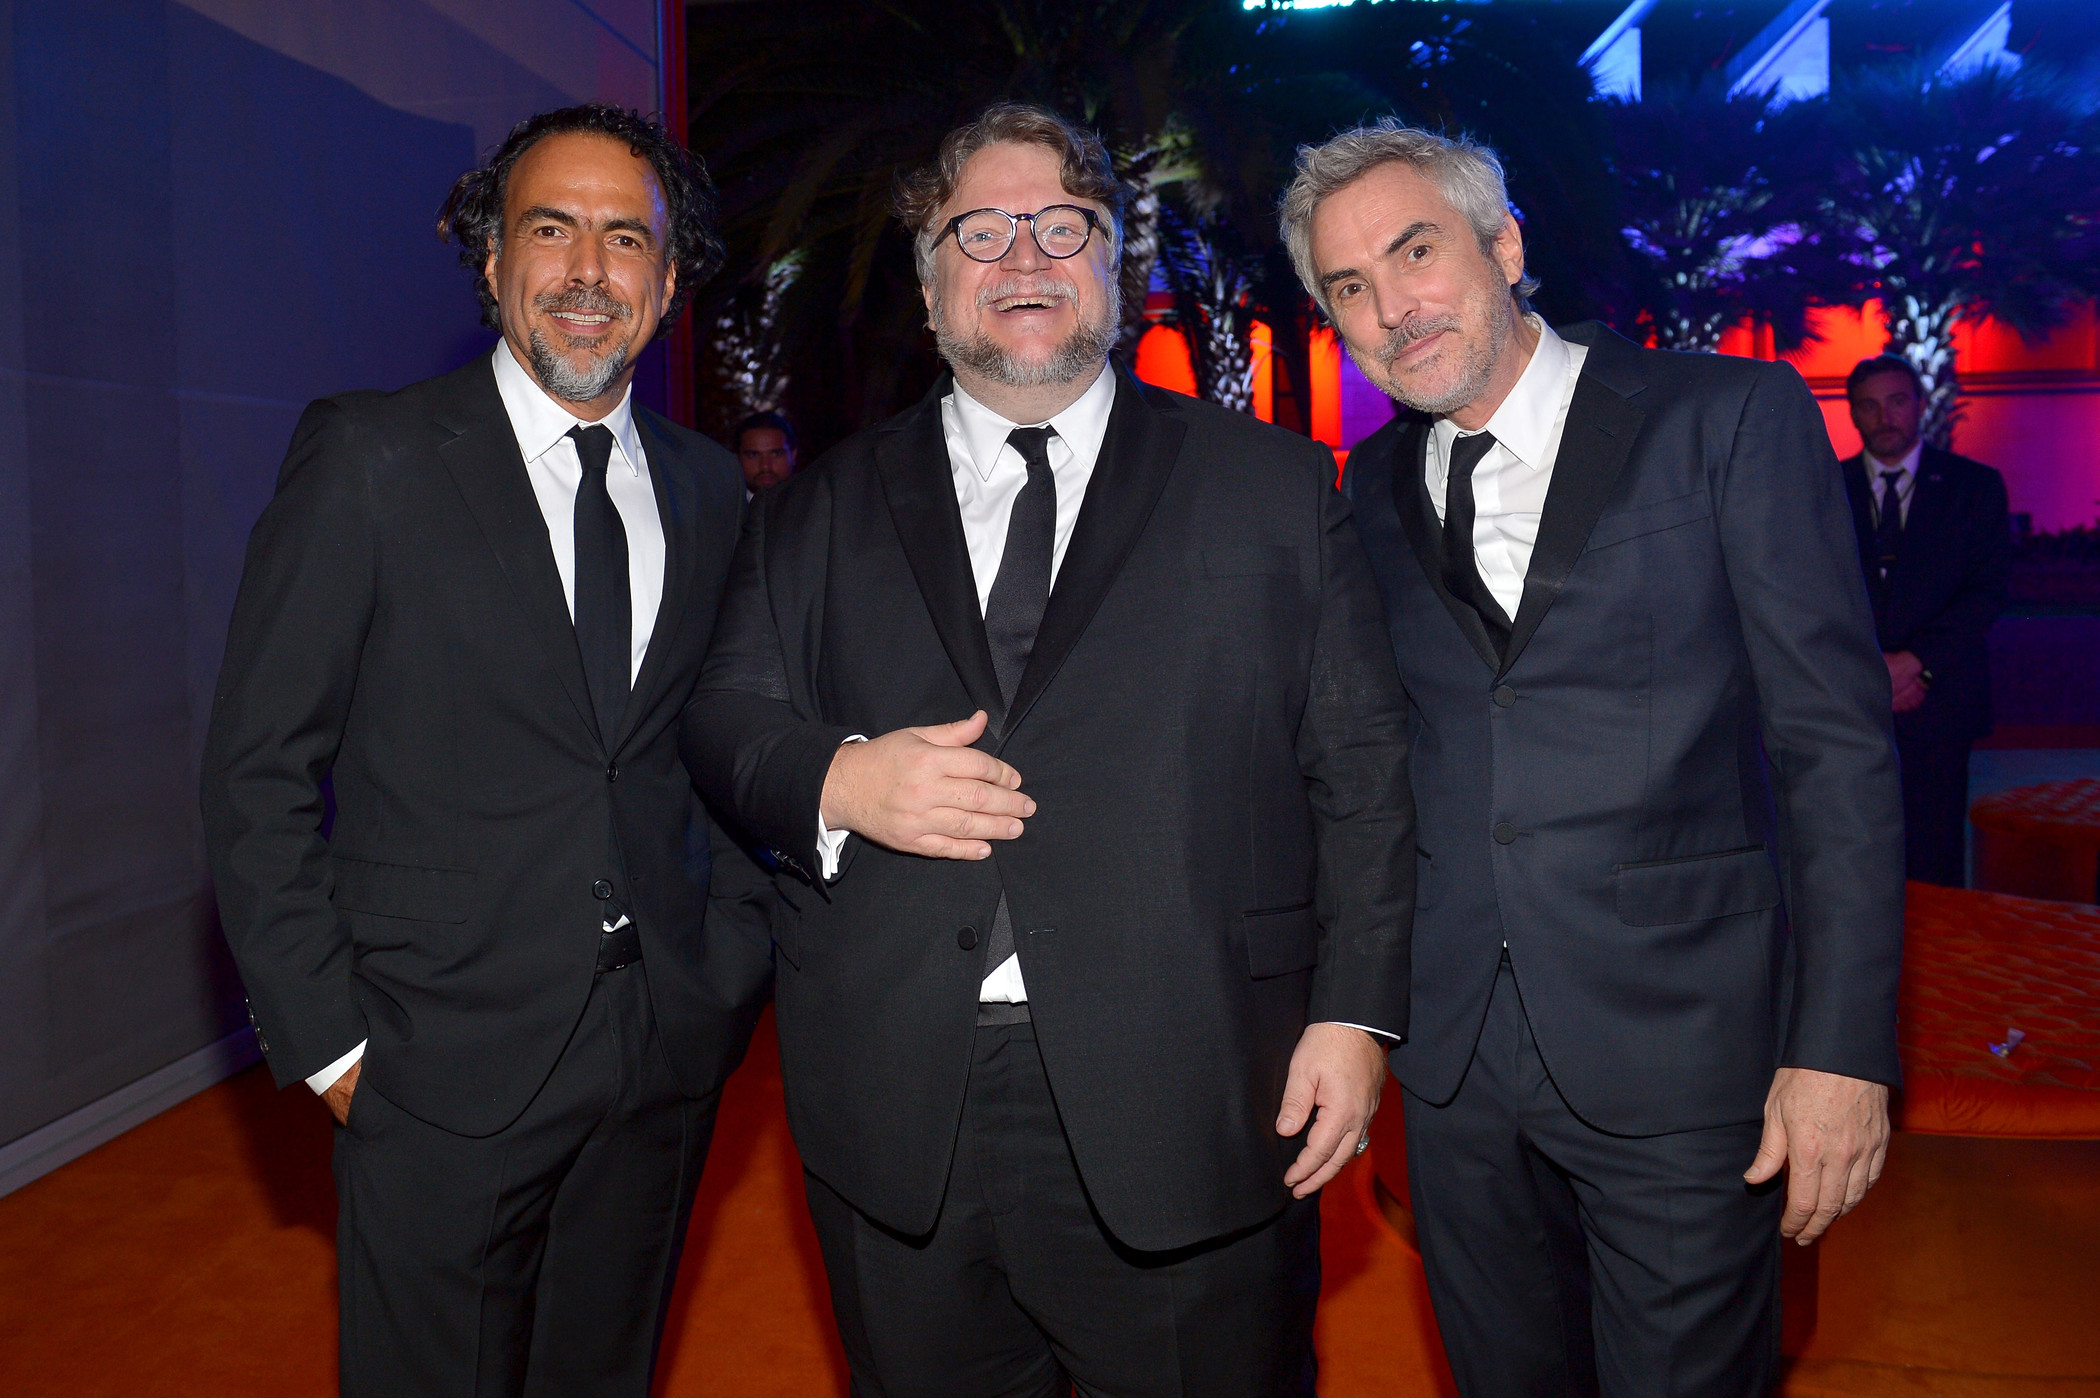 Alejandro González Iñárritu, Honoree Guillermo del Toro, and Alfonso Cuarón at the 2018 LACMA Art + Film Gala honoring Catherine Opie and Guillermo del Toro on November 3, 2018, photo Getty Images for LACMA by Donato Sardella